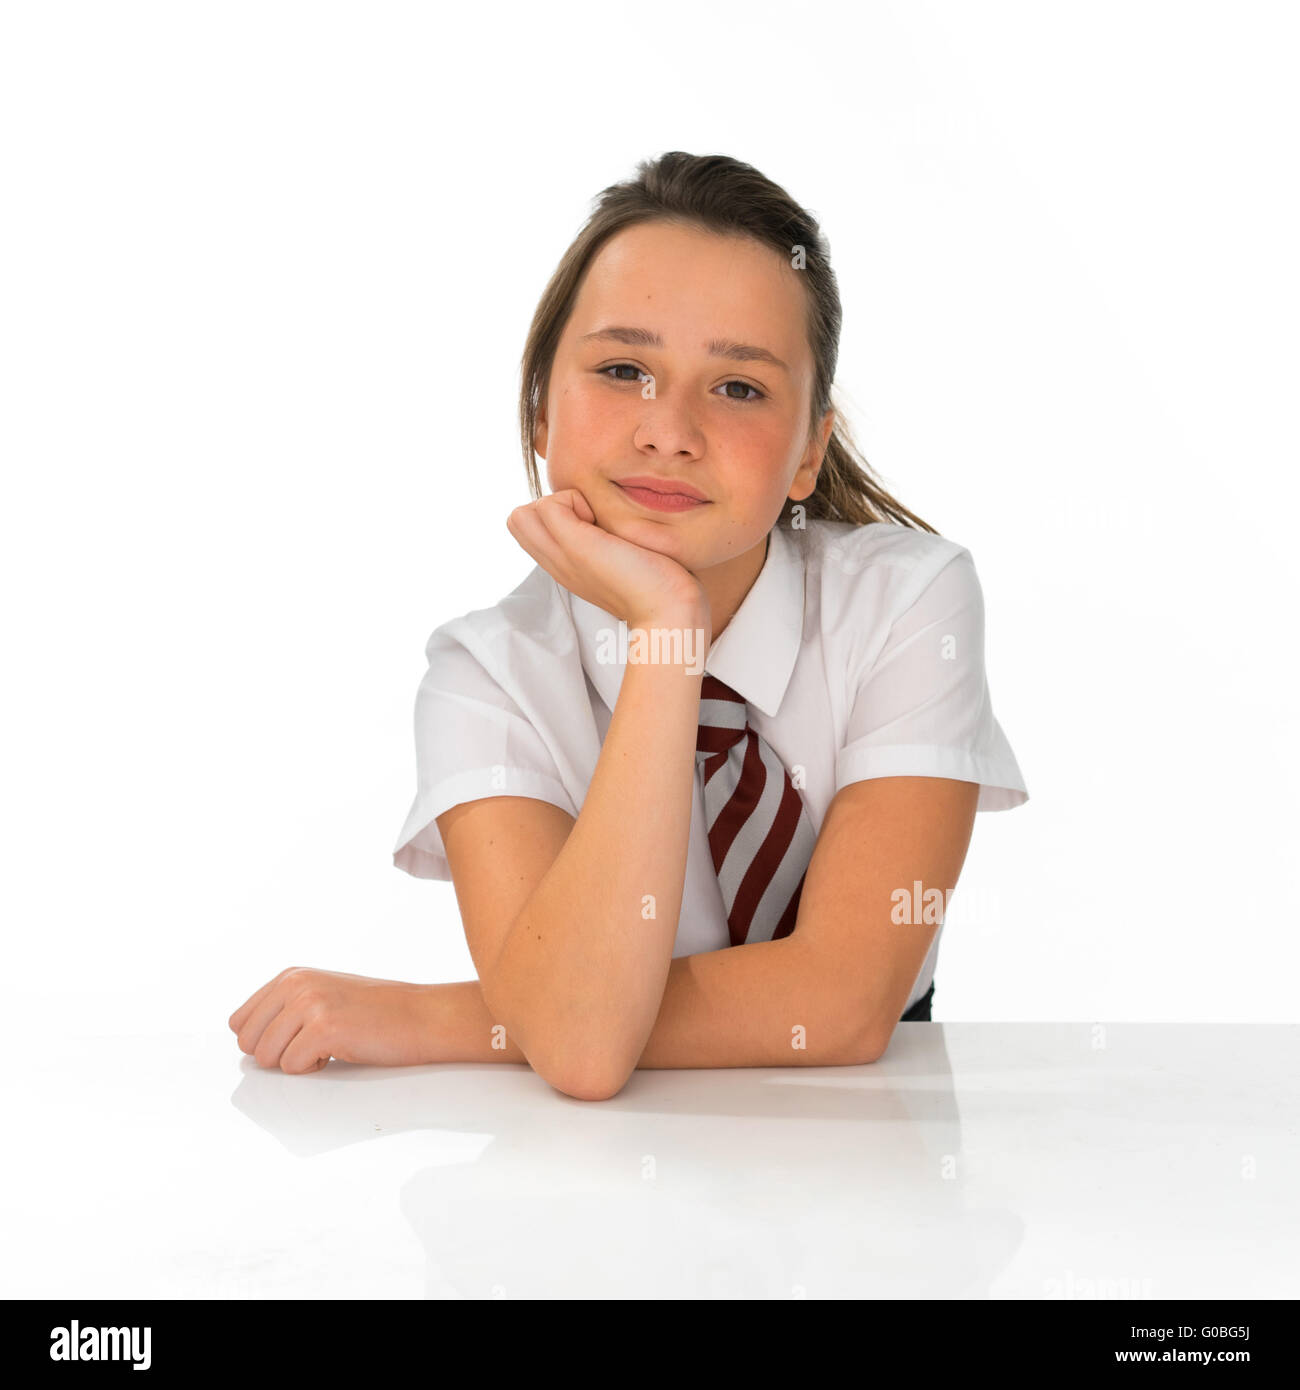 Bored young girl in school uniform Stock Photo